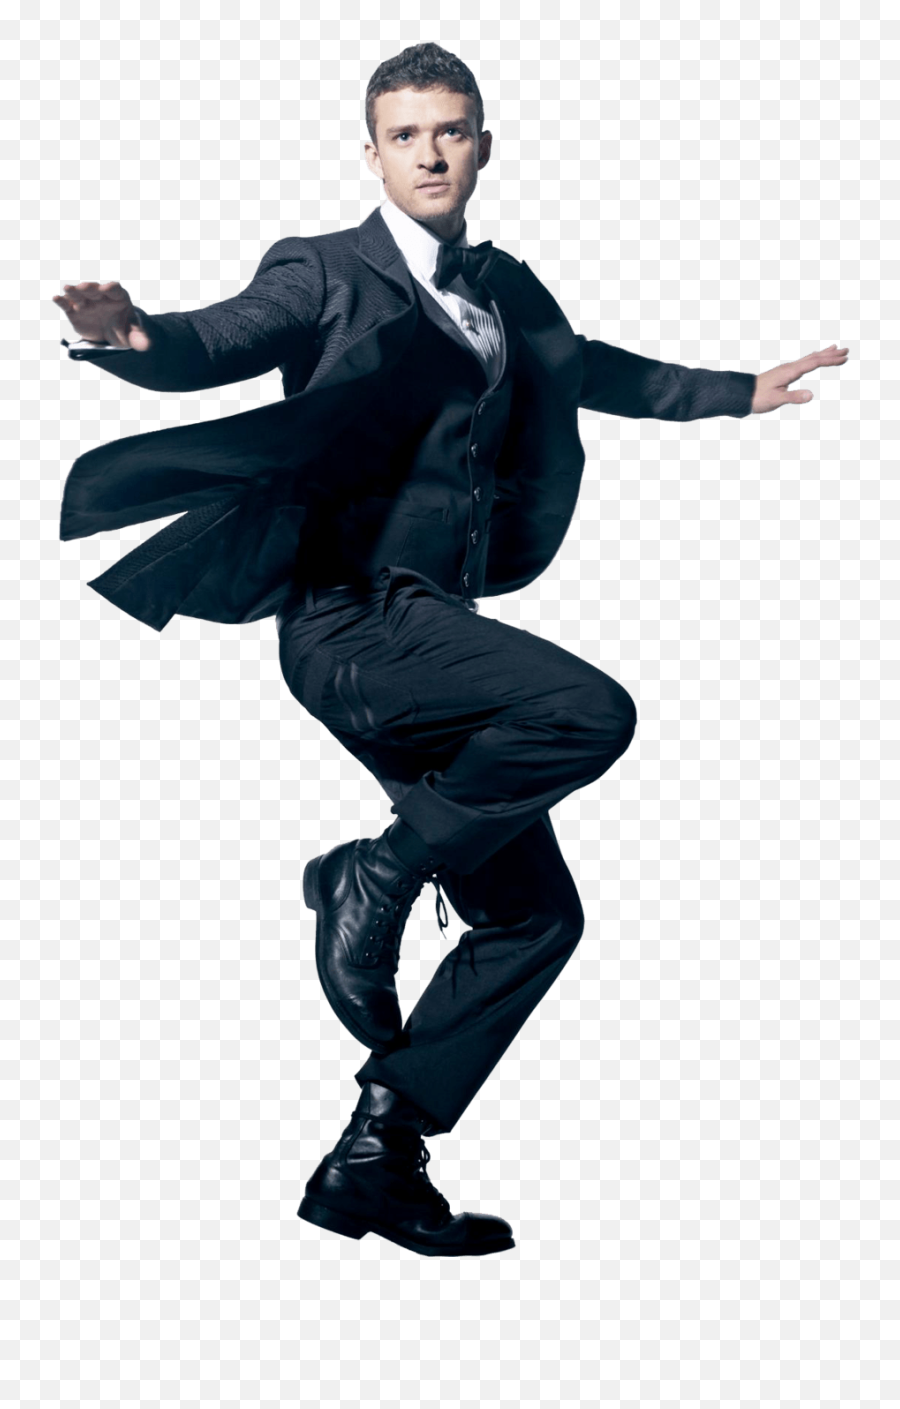 Man Dancing Transparent U0026 Png Clipart Free Download - Ywd Joker We Are All Clowns,Man Transparent Background